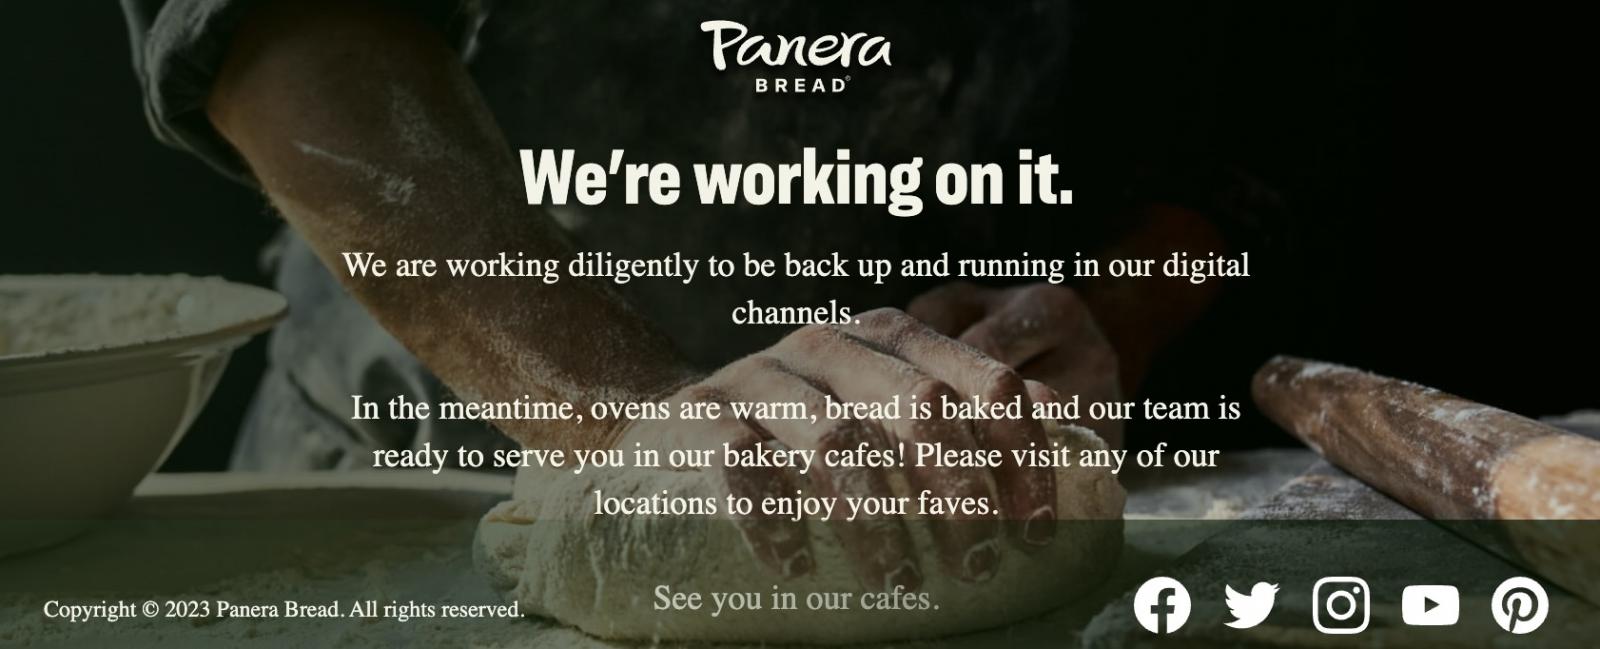 Panera Bread websote outage